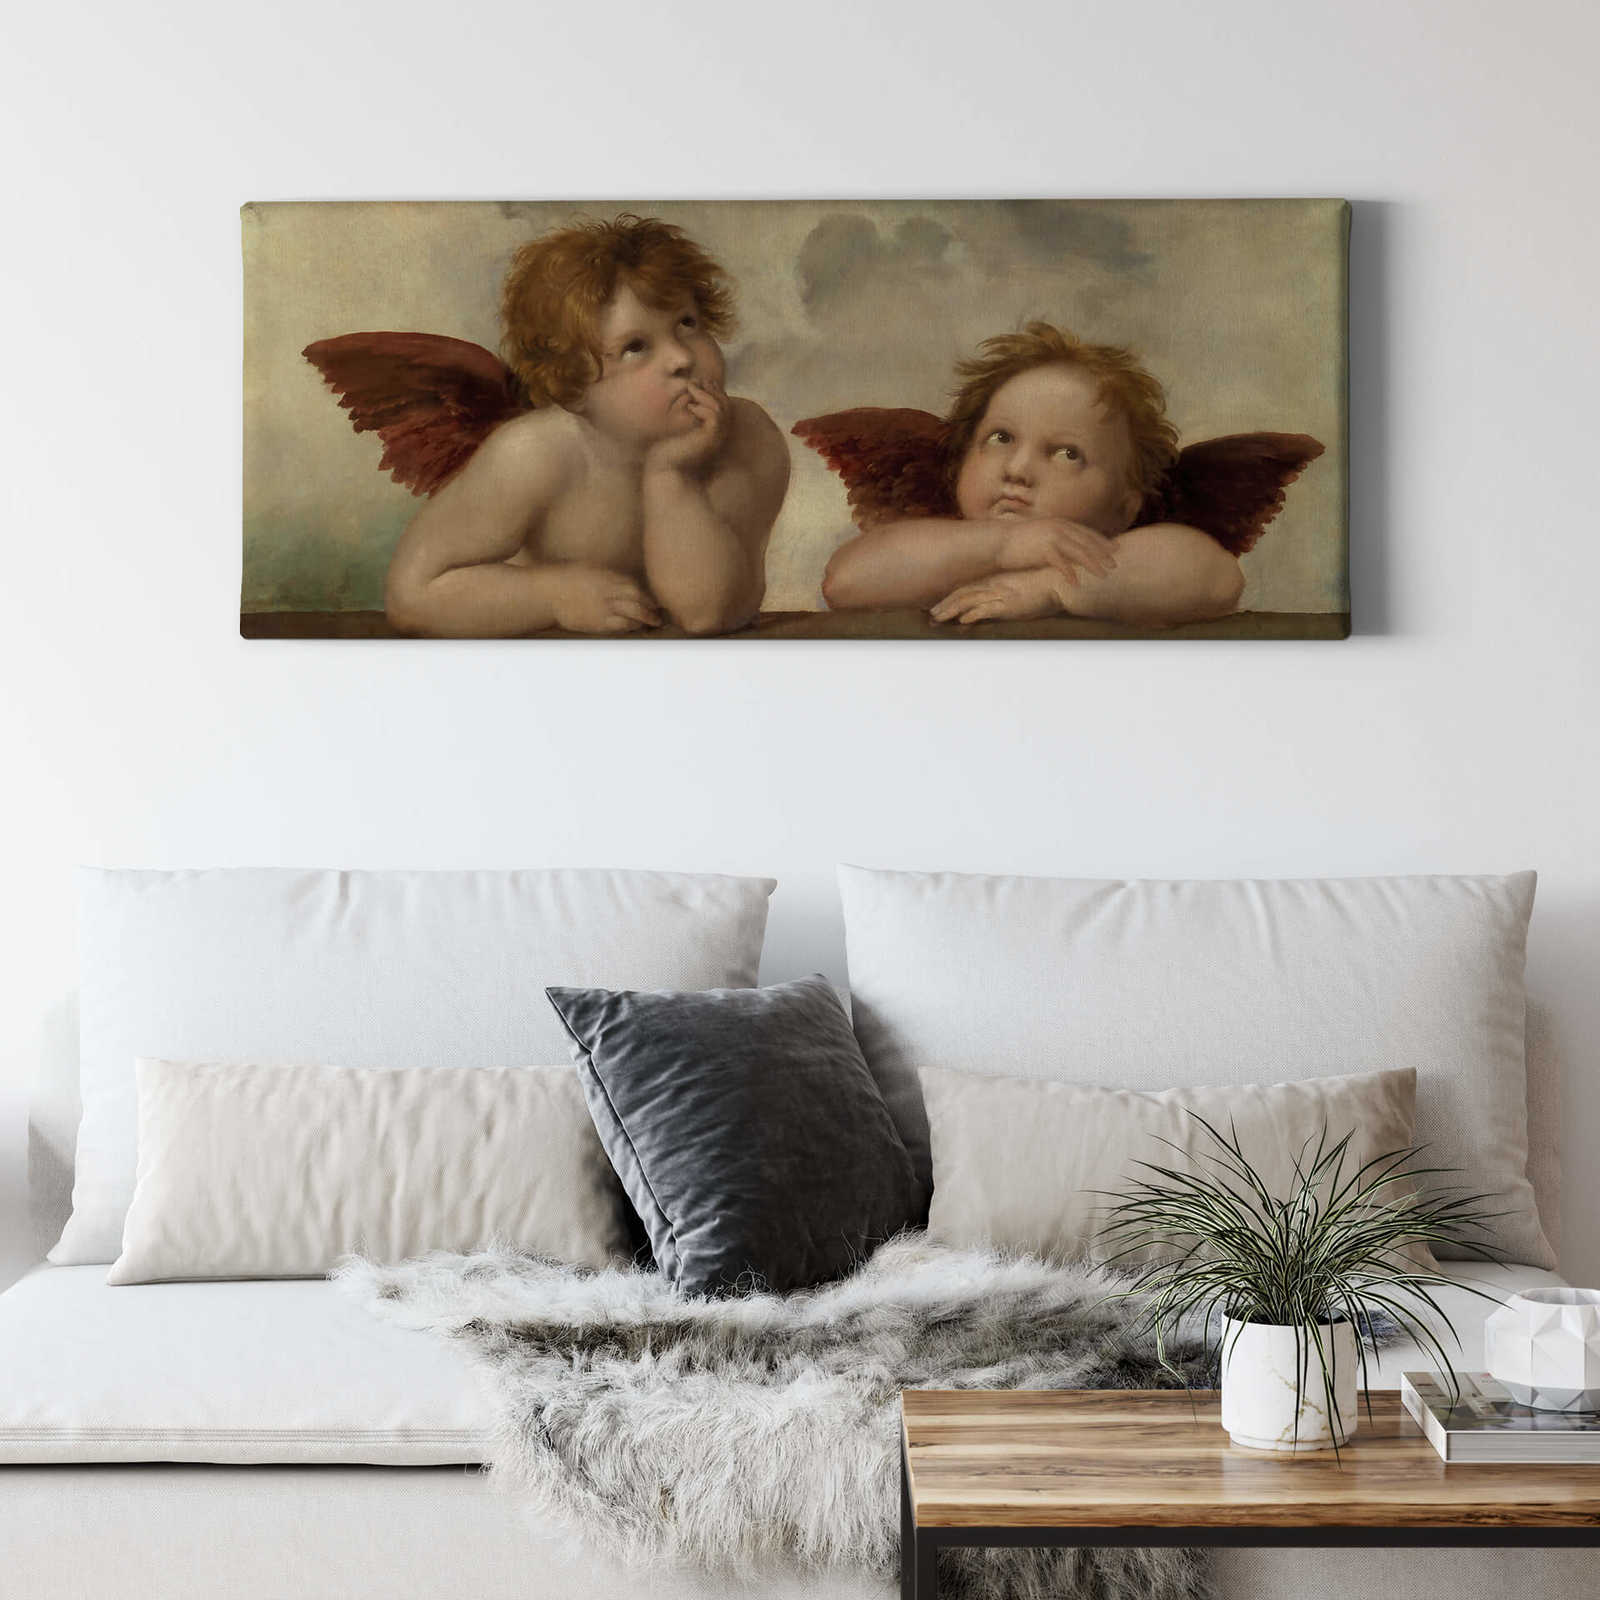             Panoramic canvas print two angels by Raphael
        